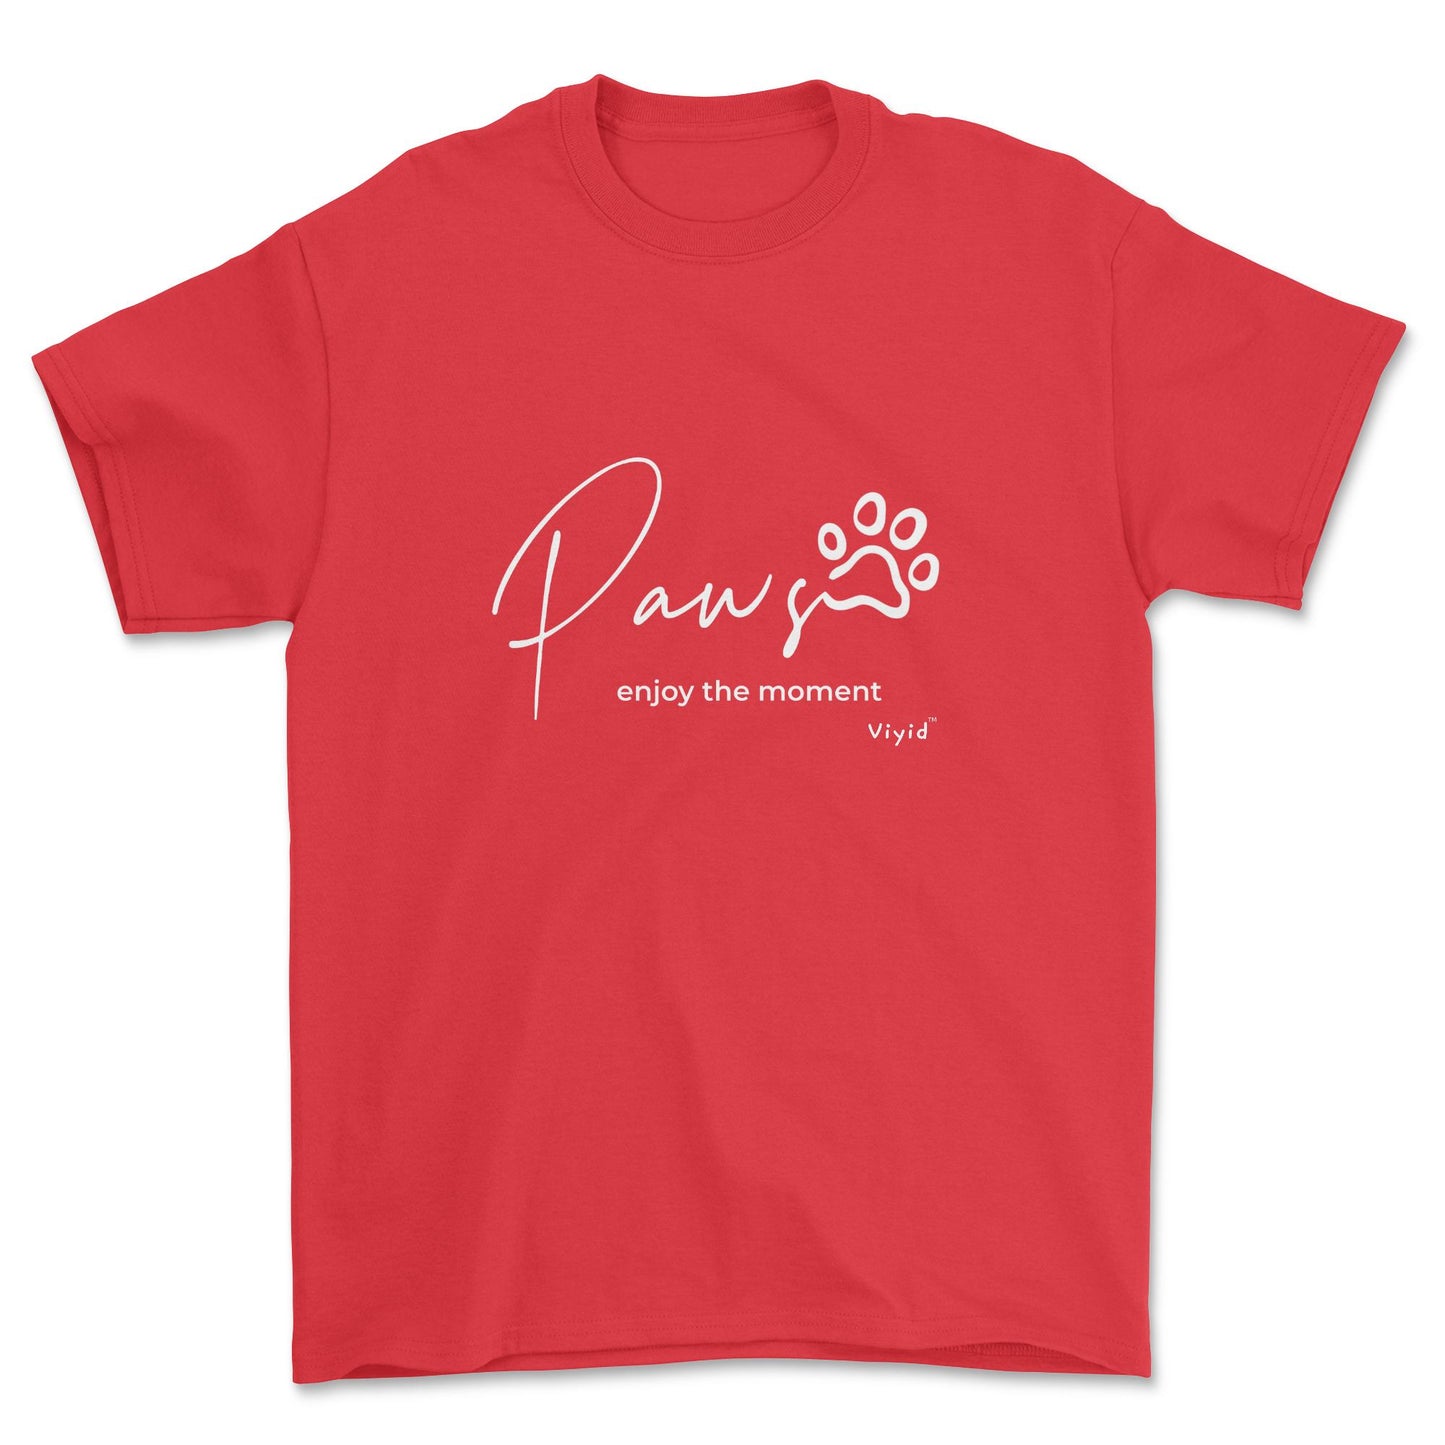 paws enjoy the moment adult t-shirt red